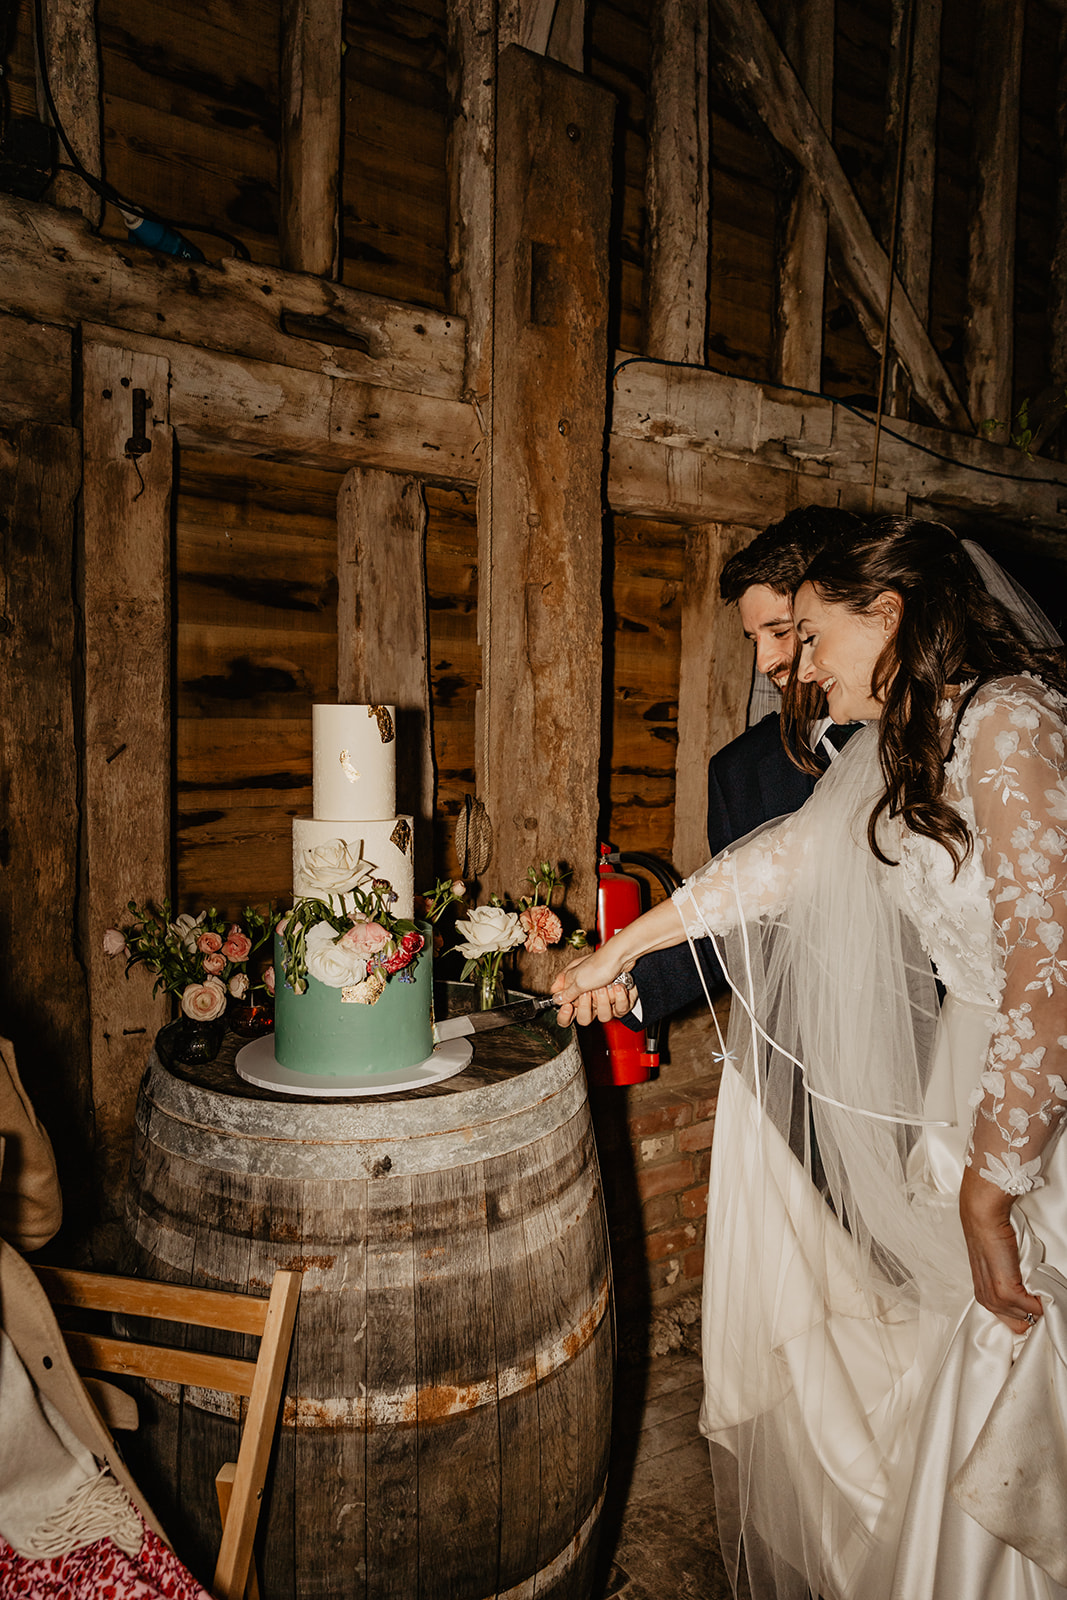 Bride and groom cutting the cake at a Secret Barn Wedding, West Sussex. By Olive Joy Photography